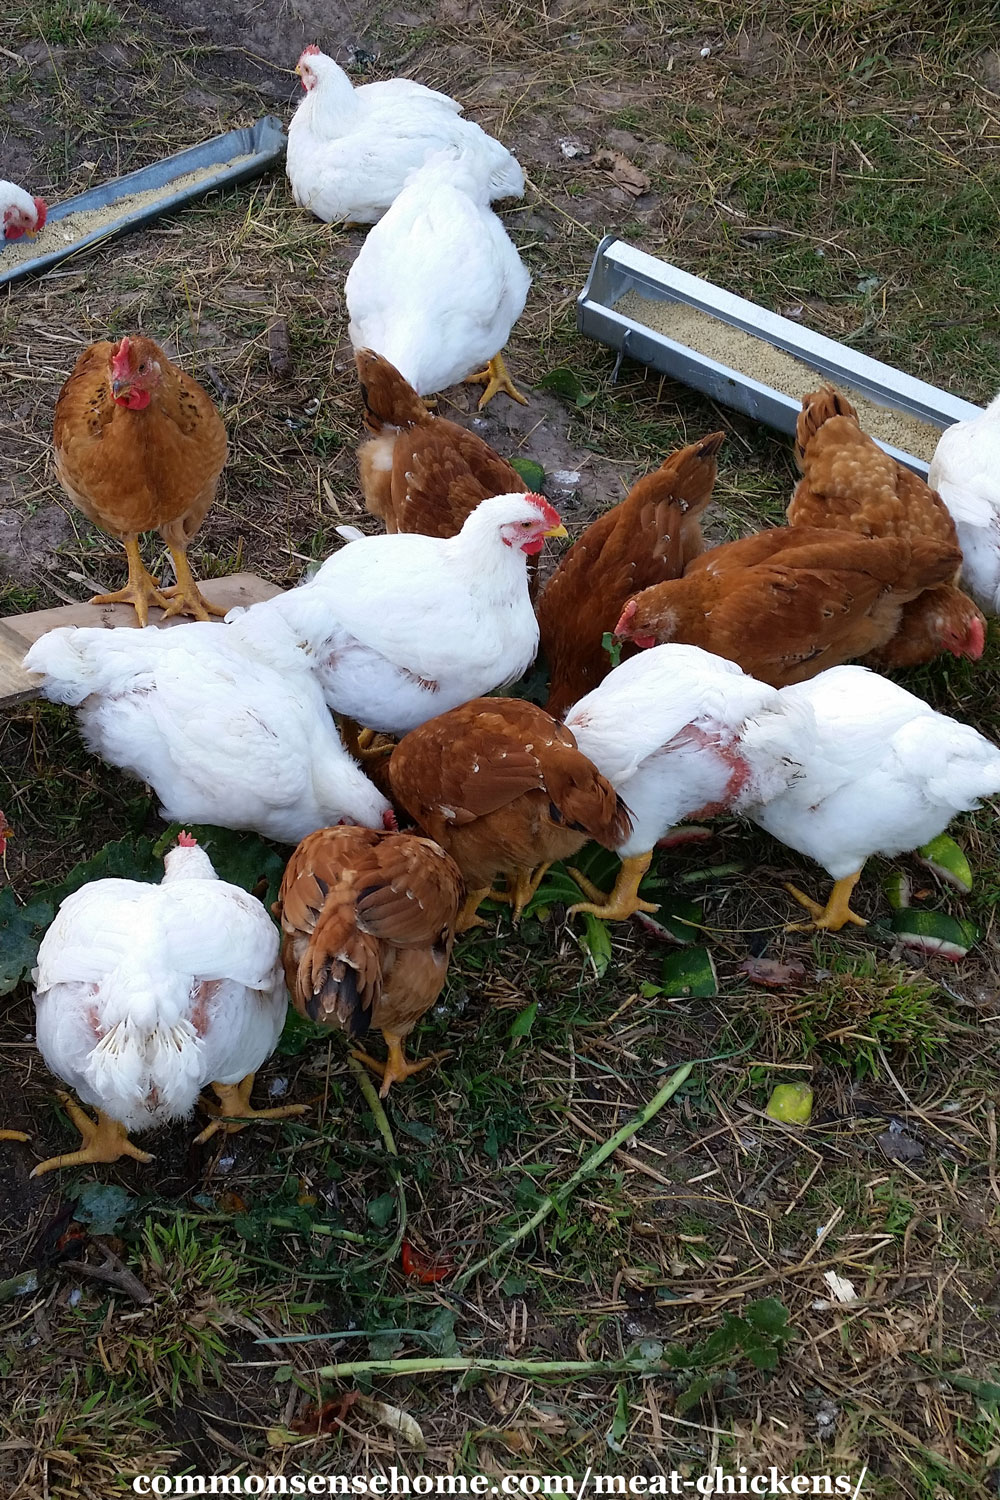 Cornish Cross and Red Ranger chickens, about half grown